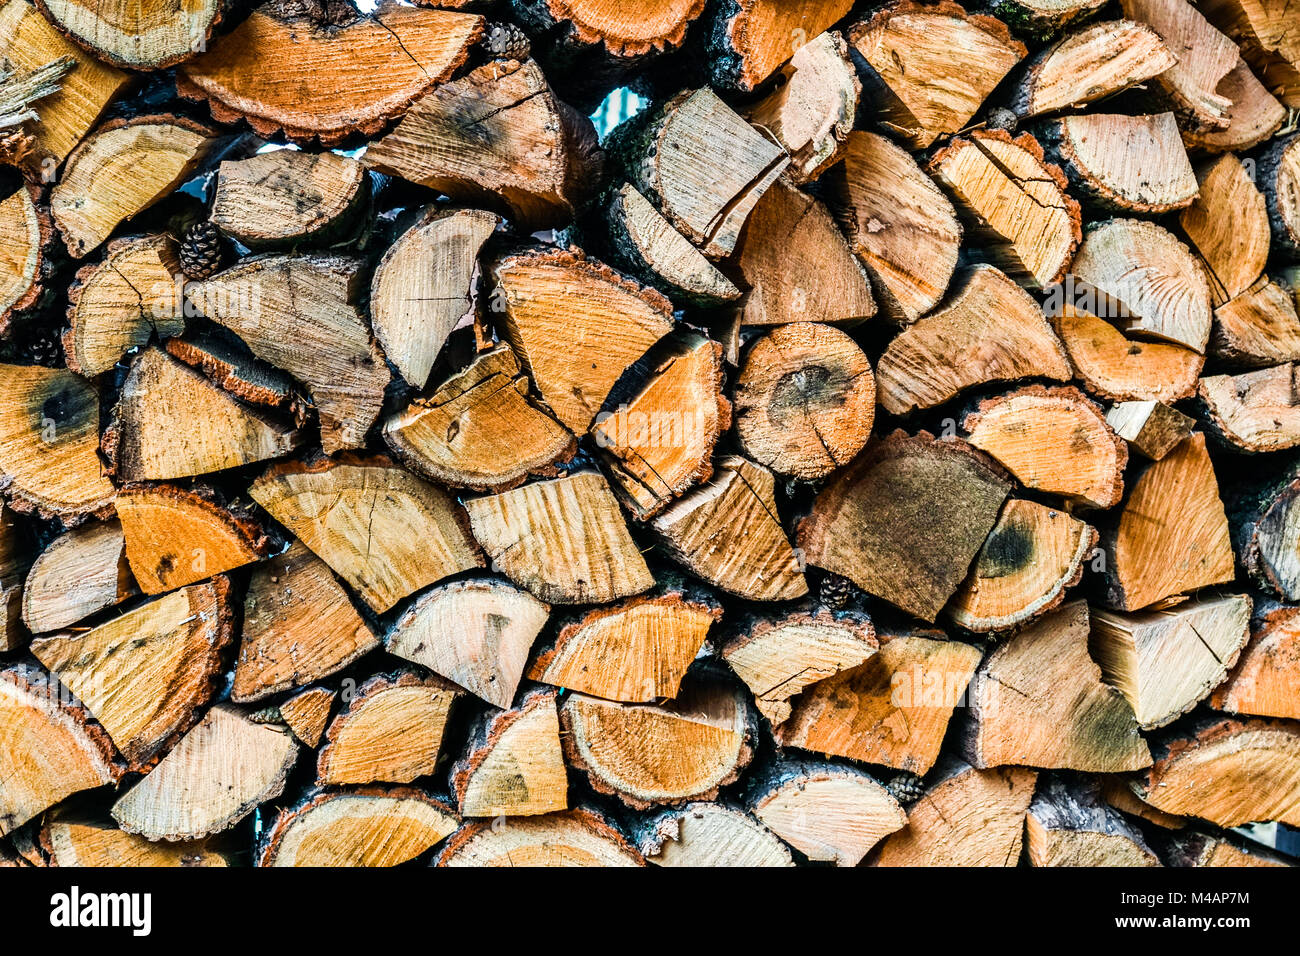 Big wall of stacked wood logs showing natural discoloration Stock Photo